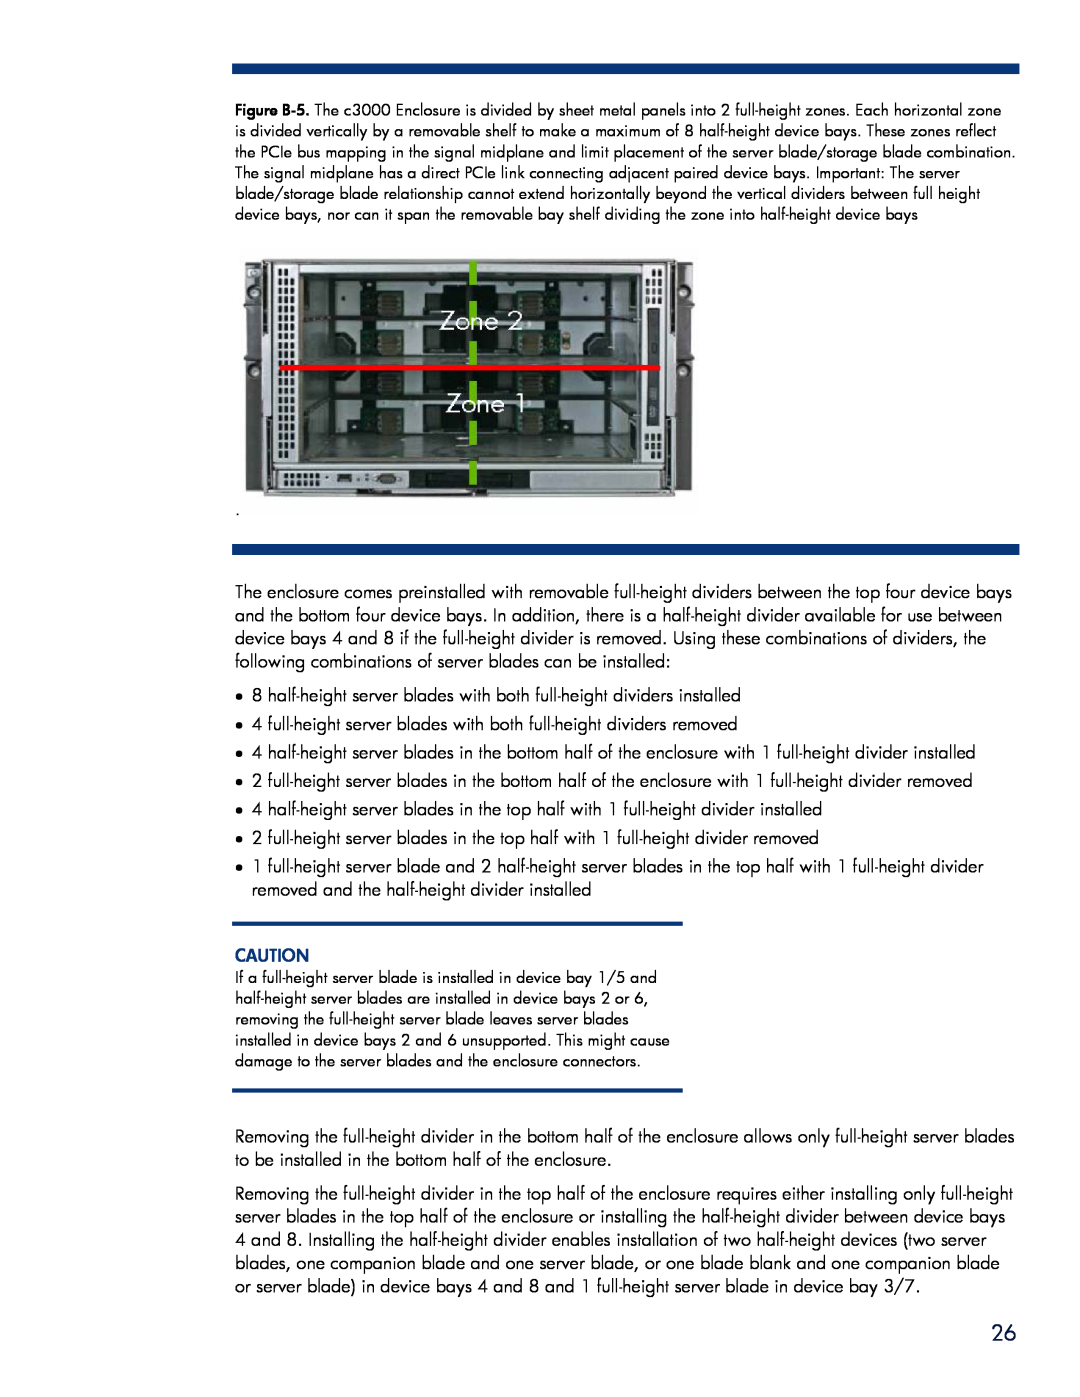 HP BladeSystem Enclosure technologies manual half-height server blades with both full-height dividers installed 